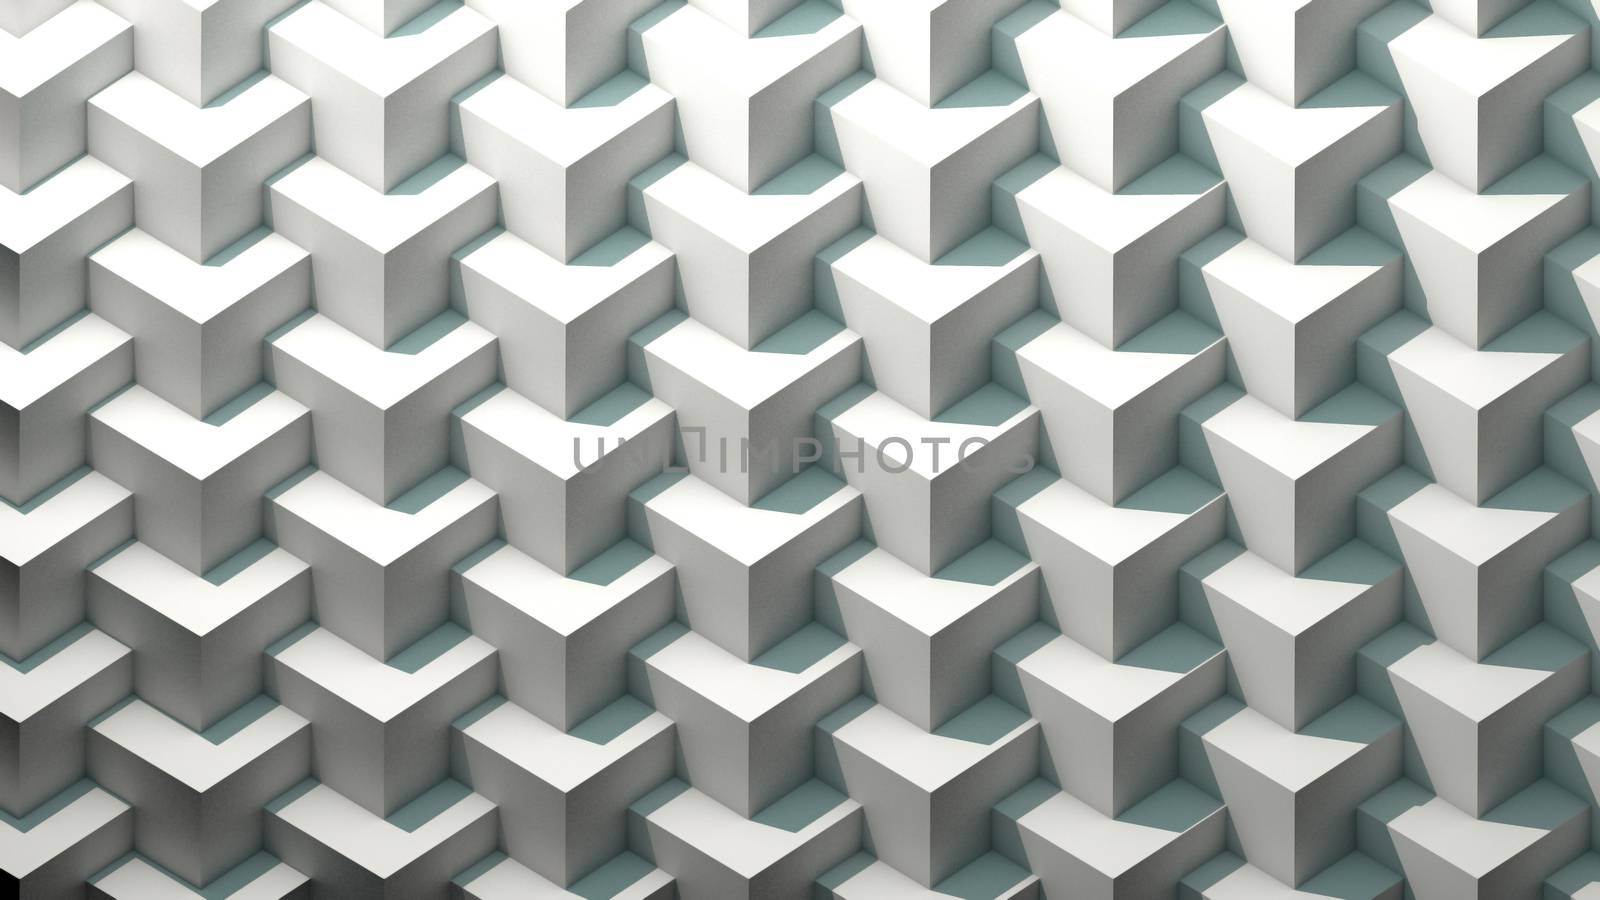 3D cube pattern repetition with shadows. 3D Rendering